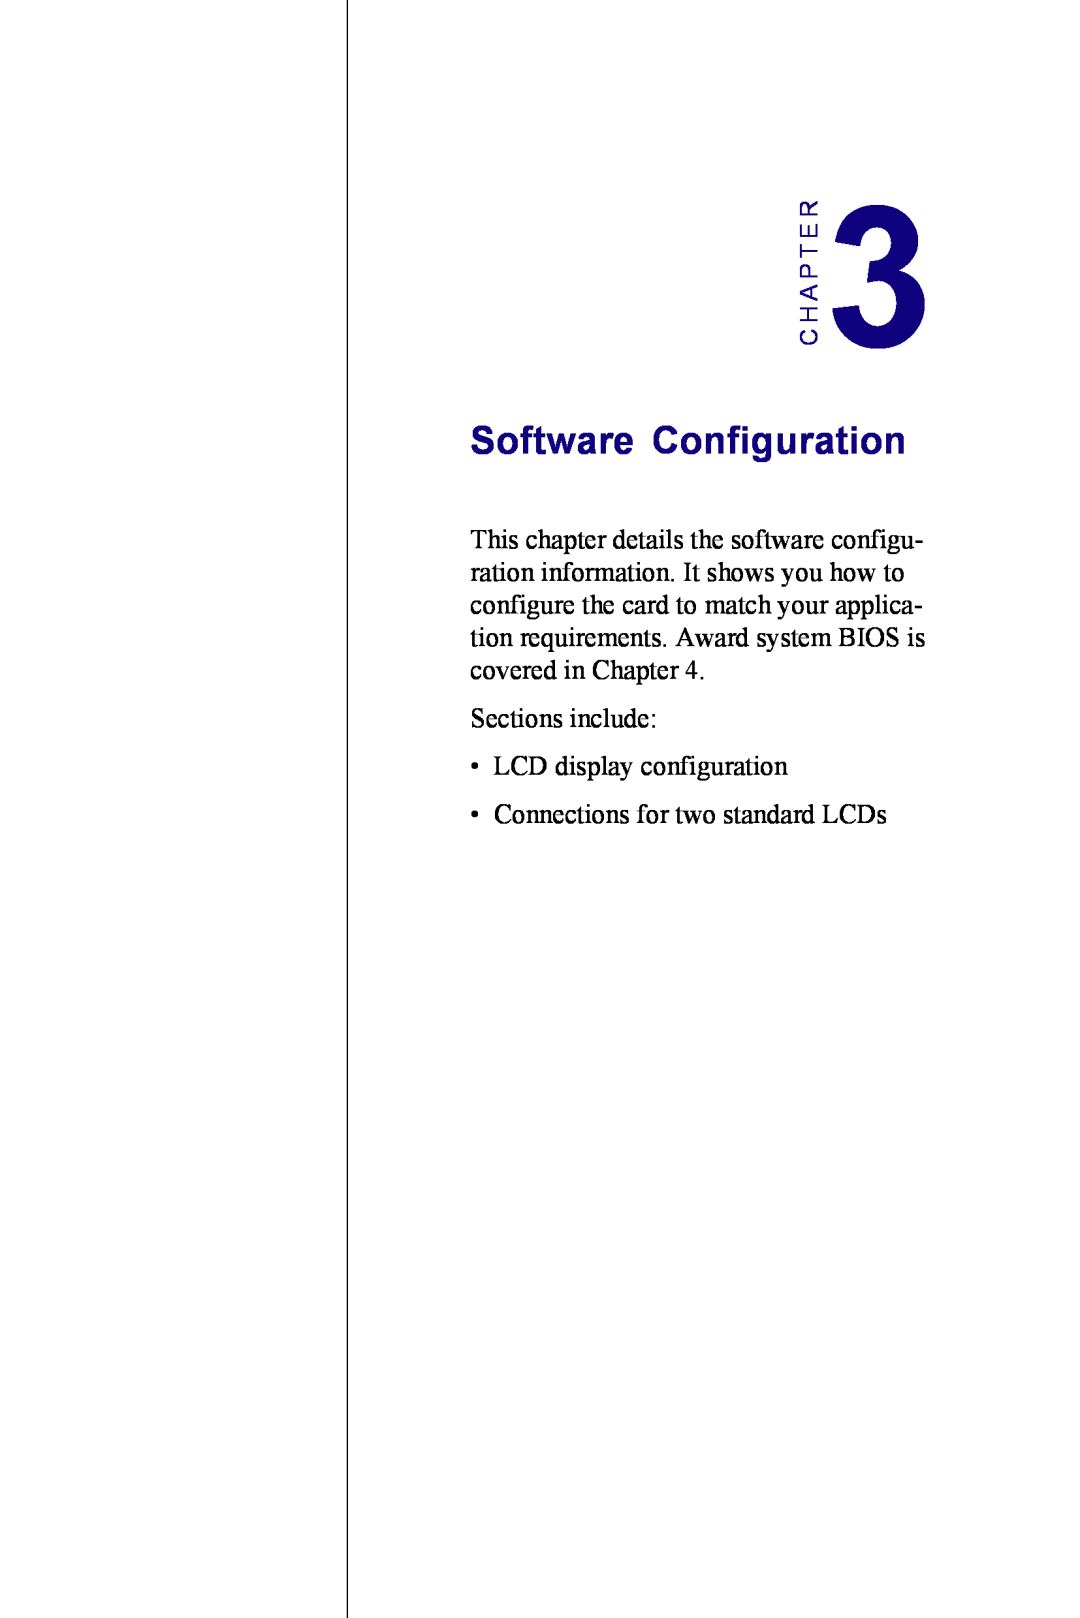 Advantech PCM-3350 Series user manual Software Configuration, Sections include LCD display configuration, C H A P T E R 